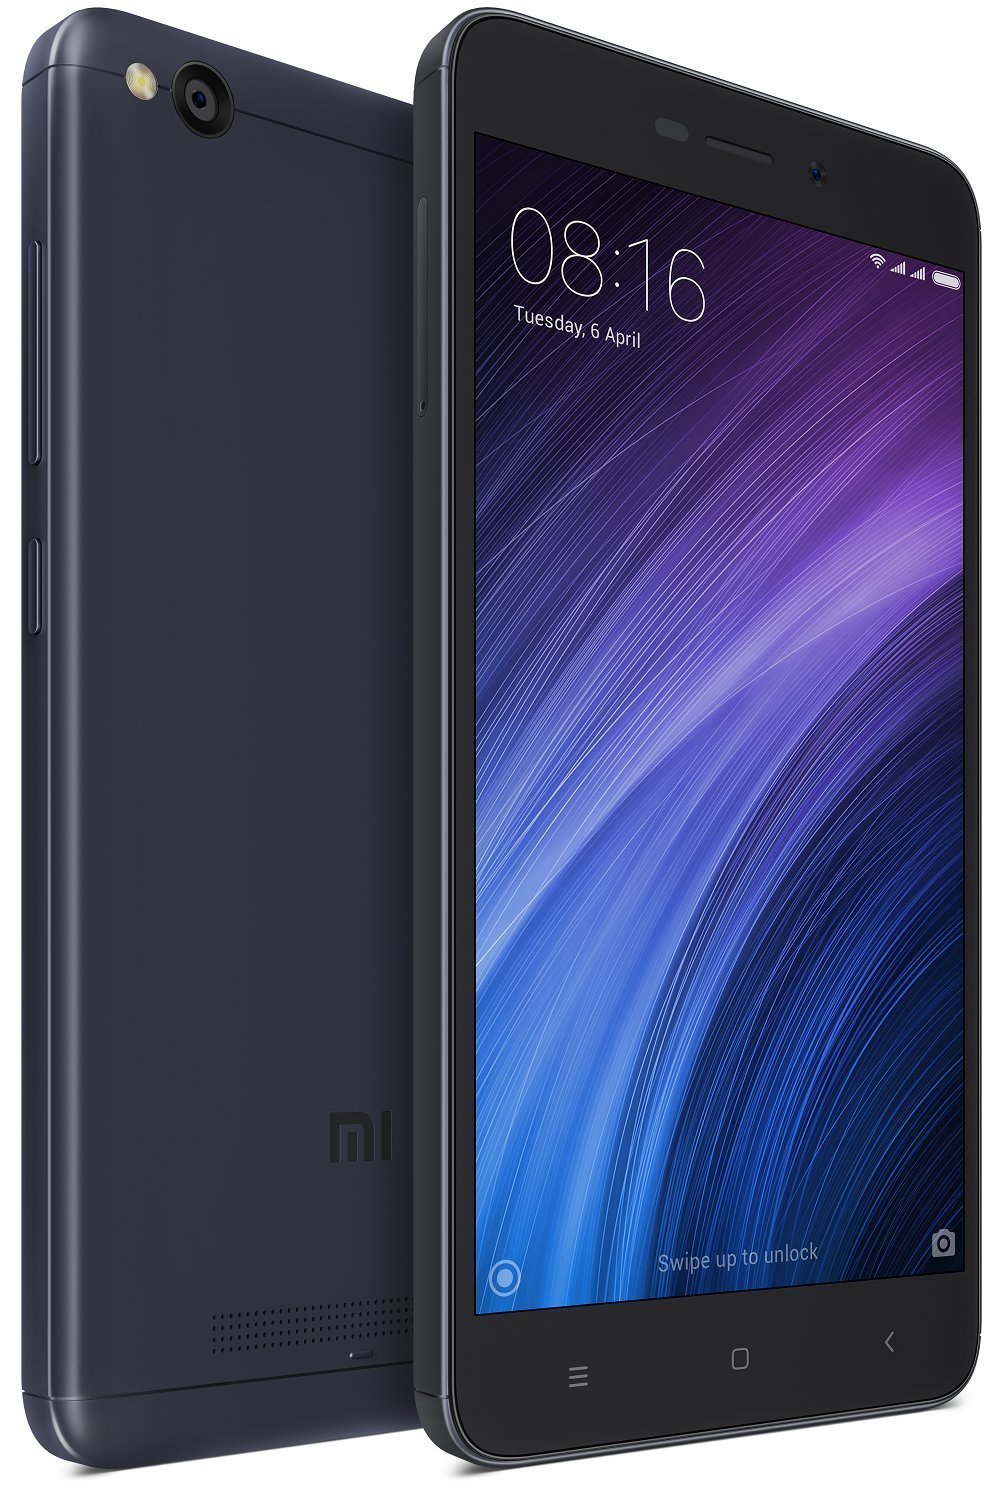 XIAOMI REDMI 4A Photos Images And Wallpapers MouthShutcom